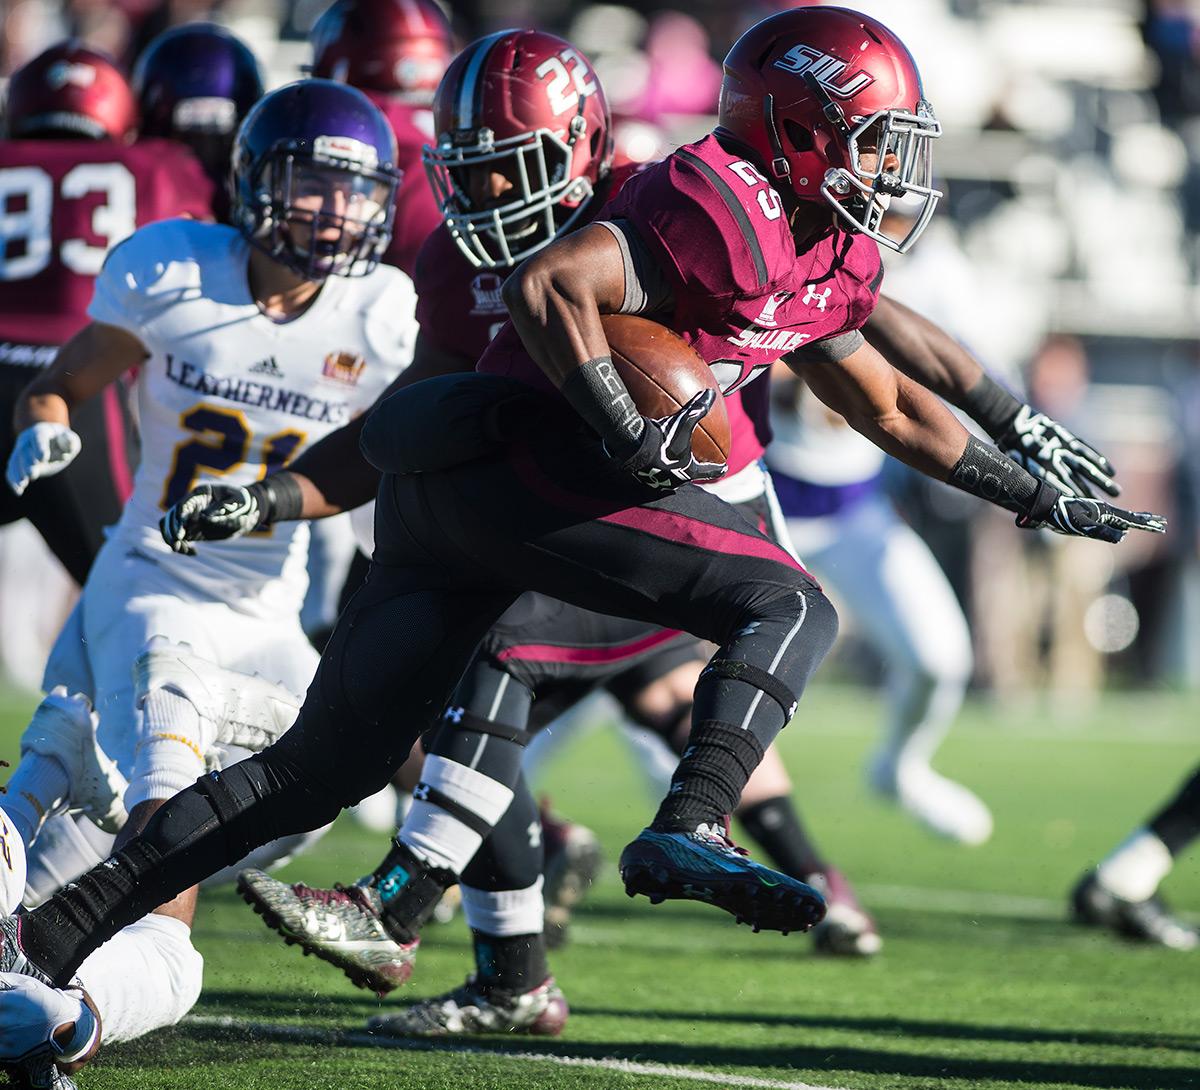 Freshman running back D.J. Davis takes the ball toward the end zone during the first half of the Salukis' matchup against WIU on Saturday, Nov. 19, 2016, at Saluki Stadium. (Jacob Wiegand | @jawiegandphoto)